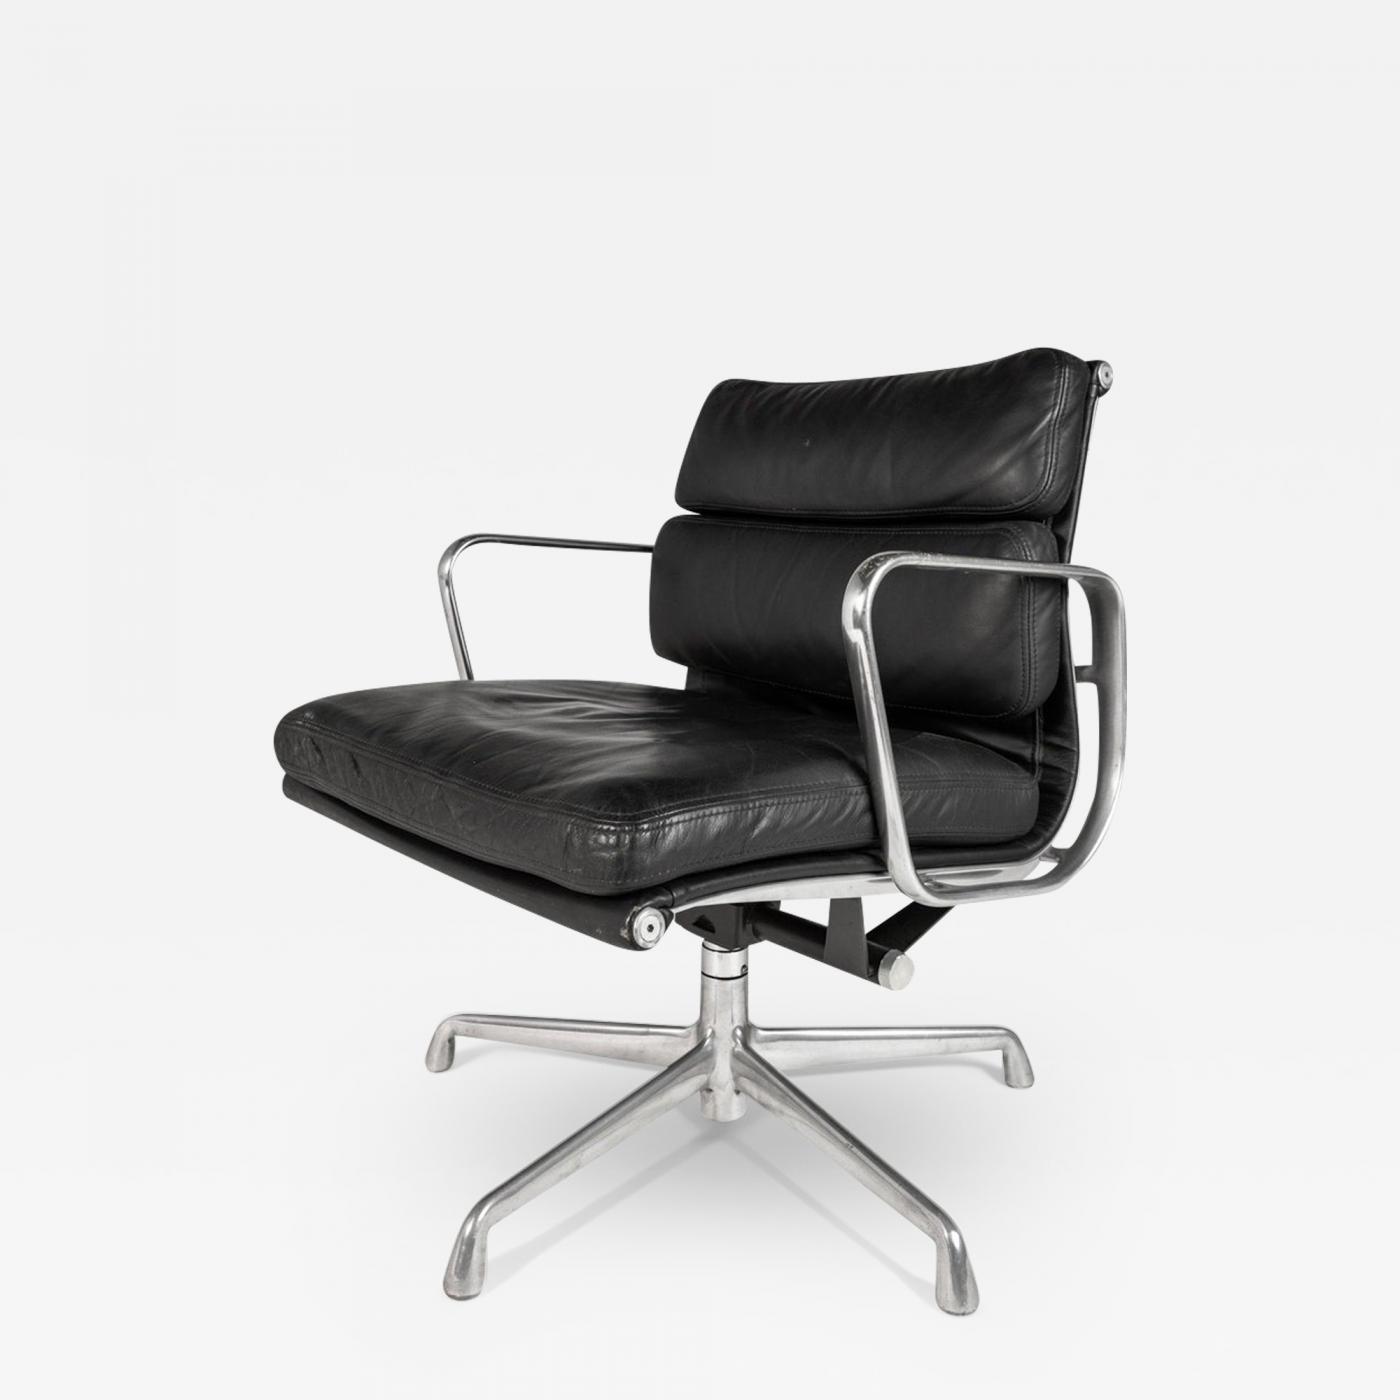 https://cdn.incollect.com/sites/default/files/zoom/Charles-Ray-Eames-Swiveling-Soft-Pad-Management-Office-Chair-in-Leather-by-Eames-for-Herman-Miller-605159-2868055.jpg